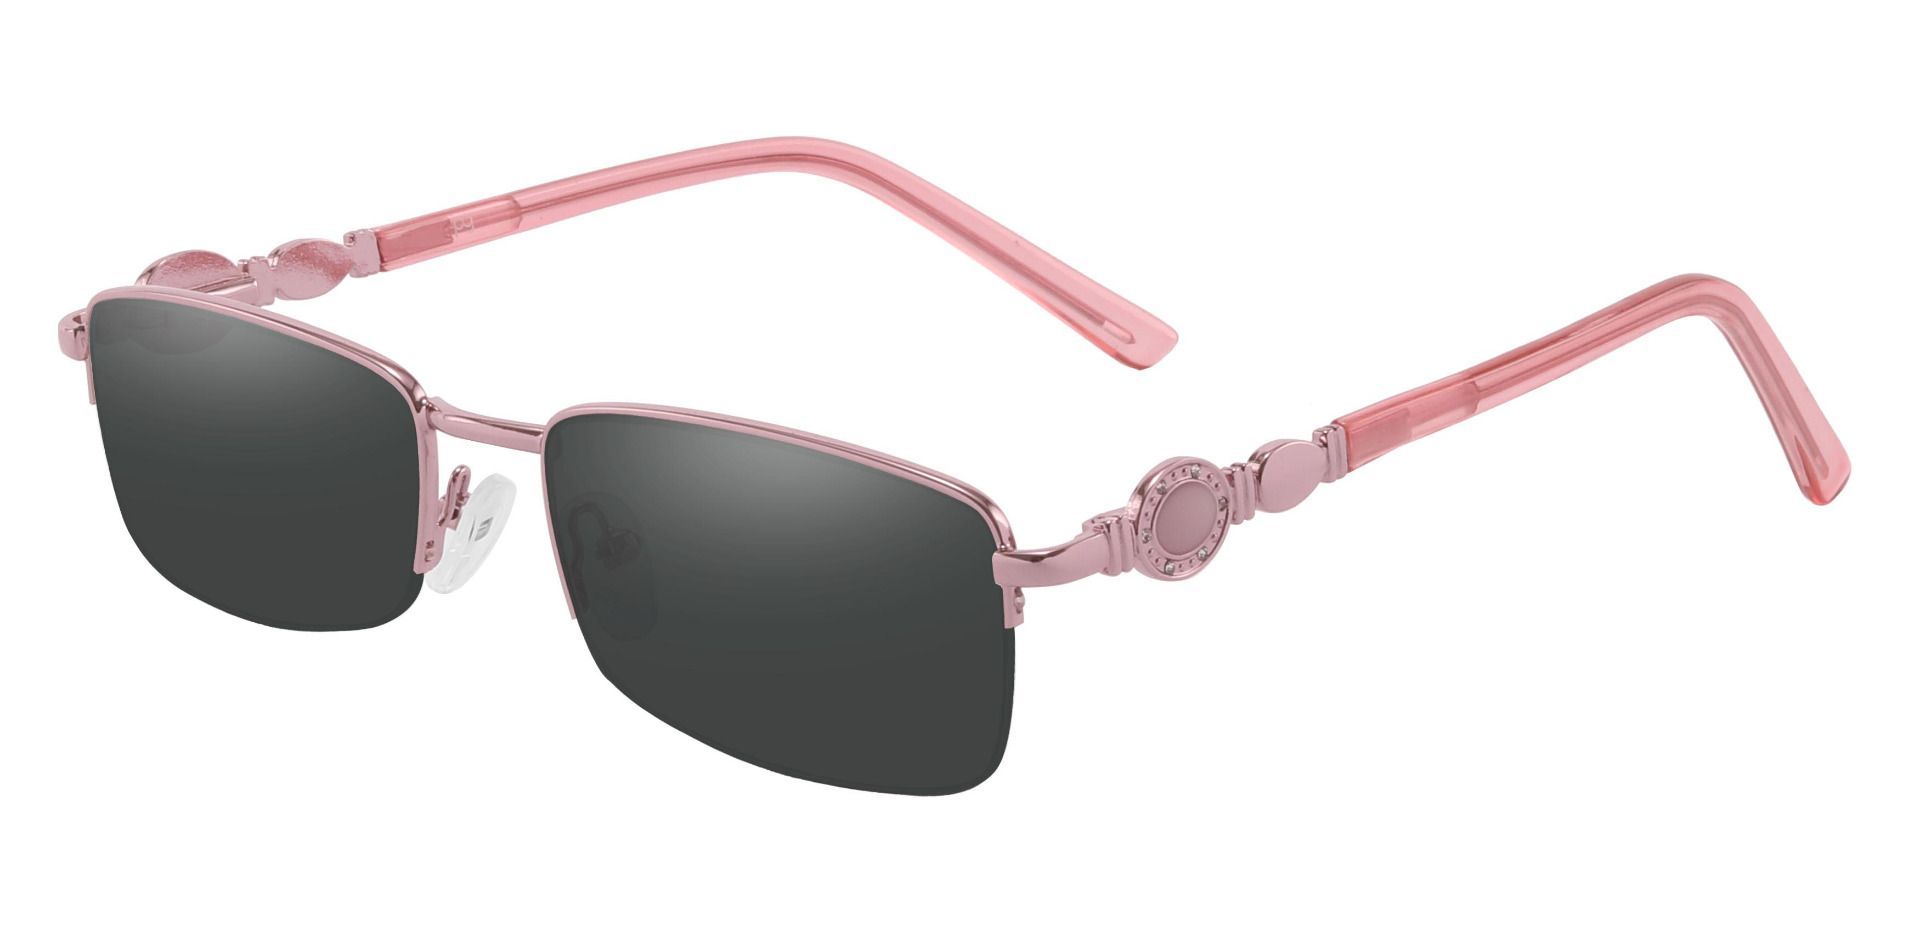 Crowley Rectangle Prescription Sunglasses - Pink Frame With Gray Lenses